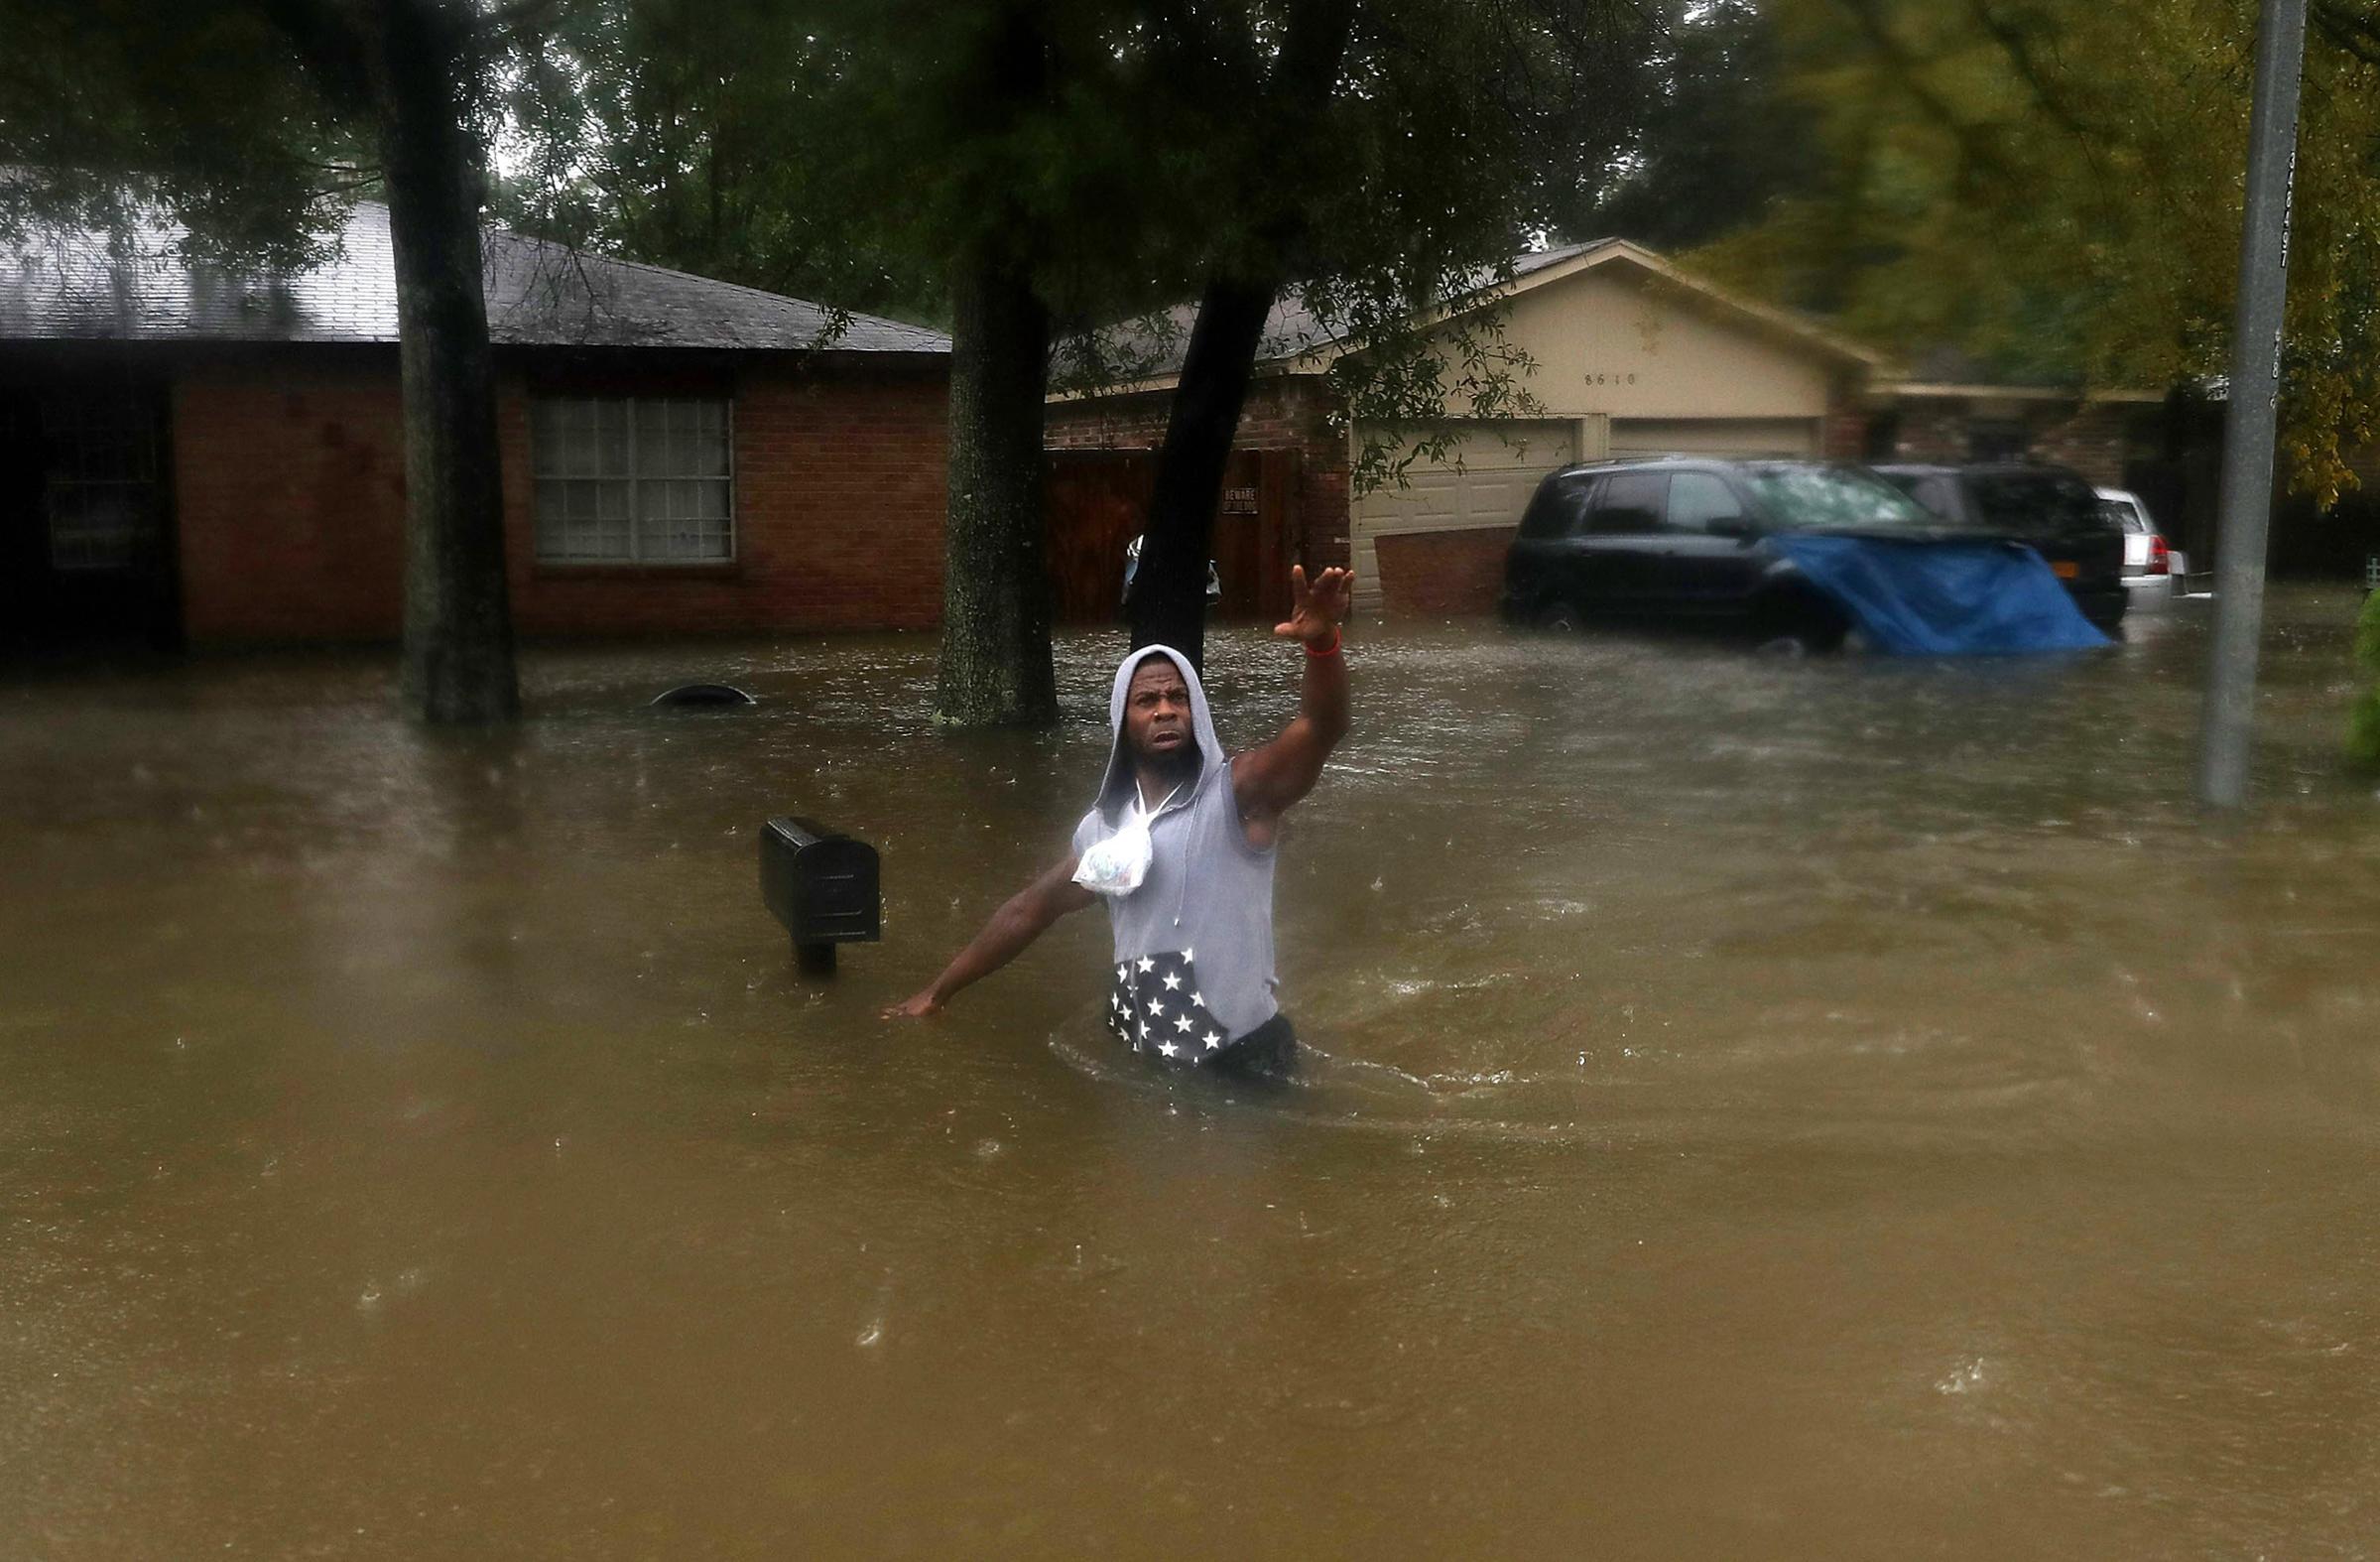 A person waves to rescuers as he walks through a flooded street after the area was inundated with flooding from Hurricane Harvey on Aug. 28, 2017 in Houston.